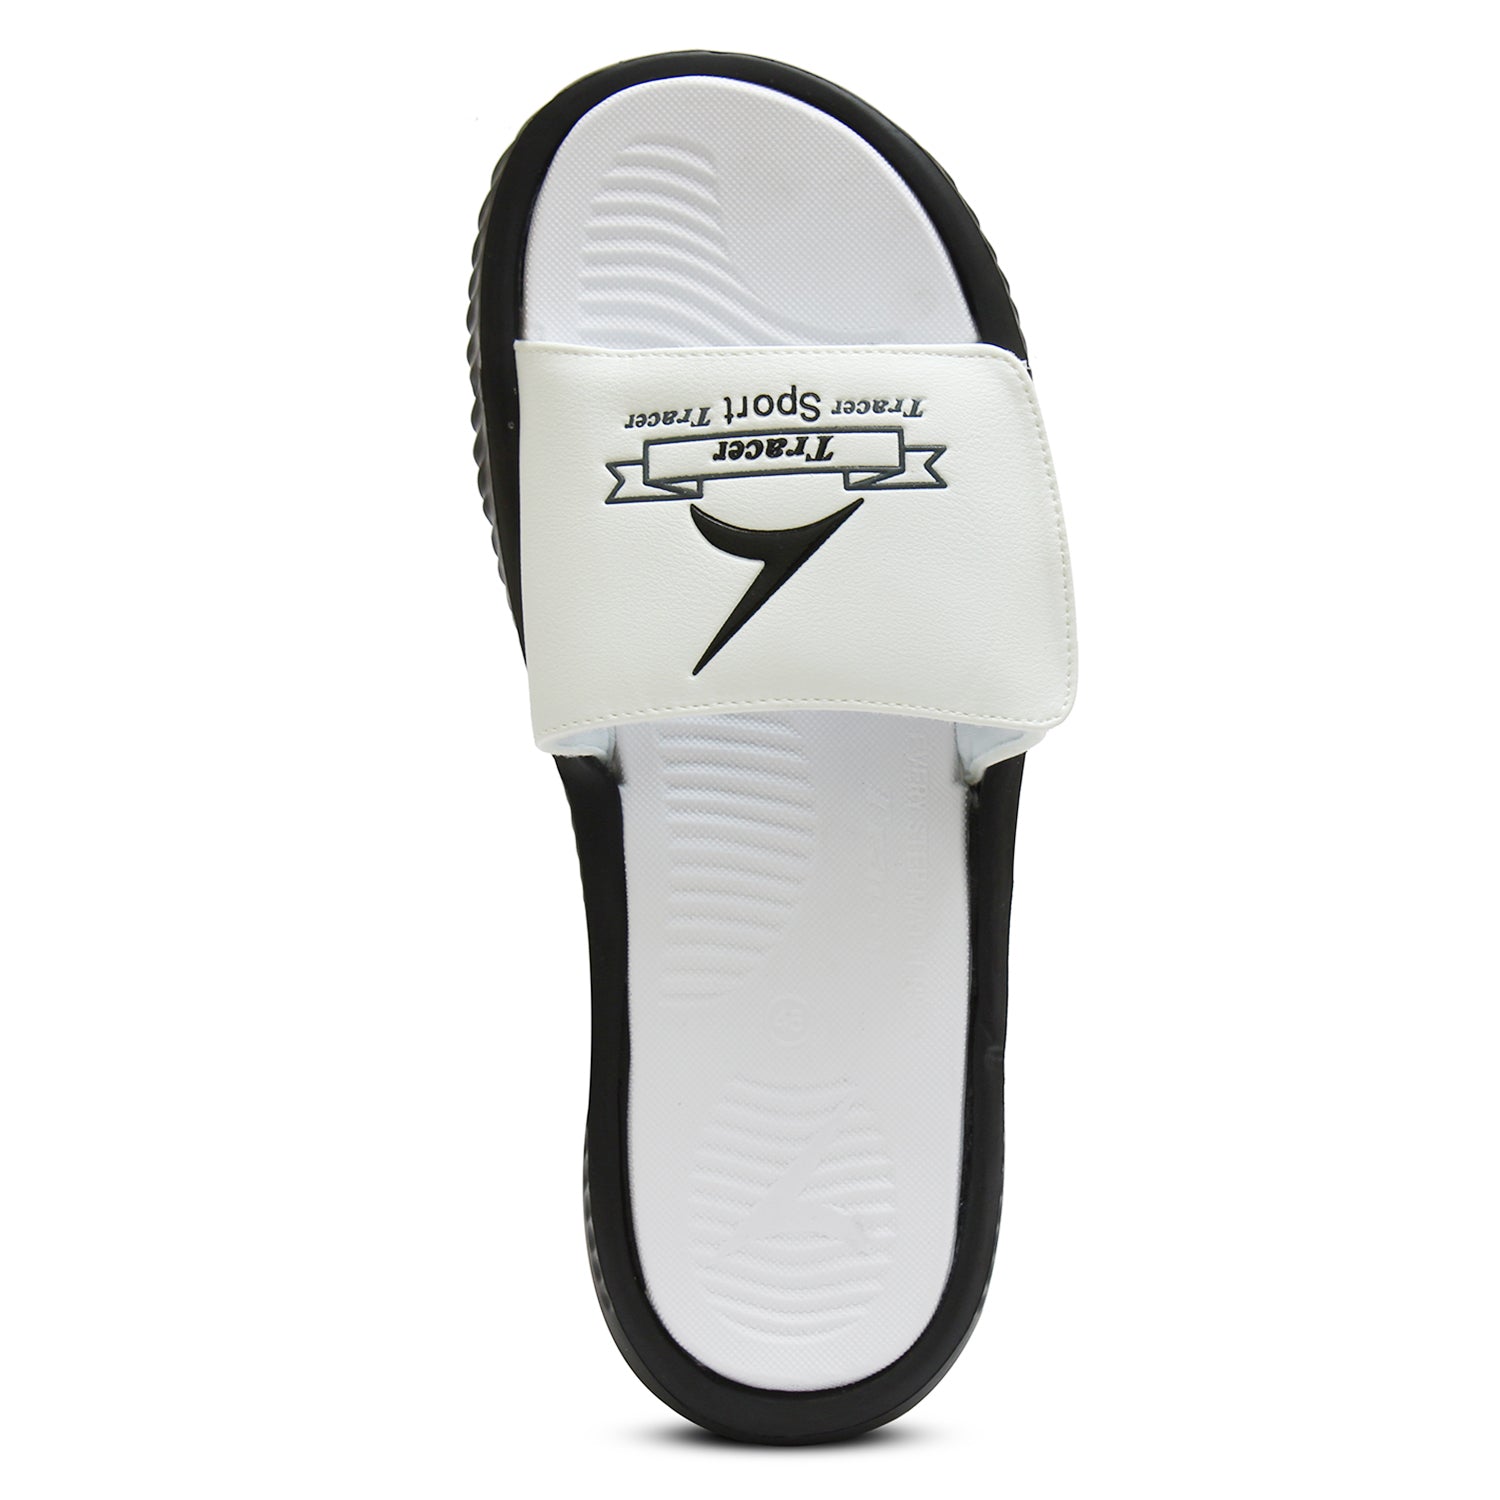 Breeze 705 Lightweight and Comfortable Flat Slippers For Men's